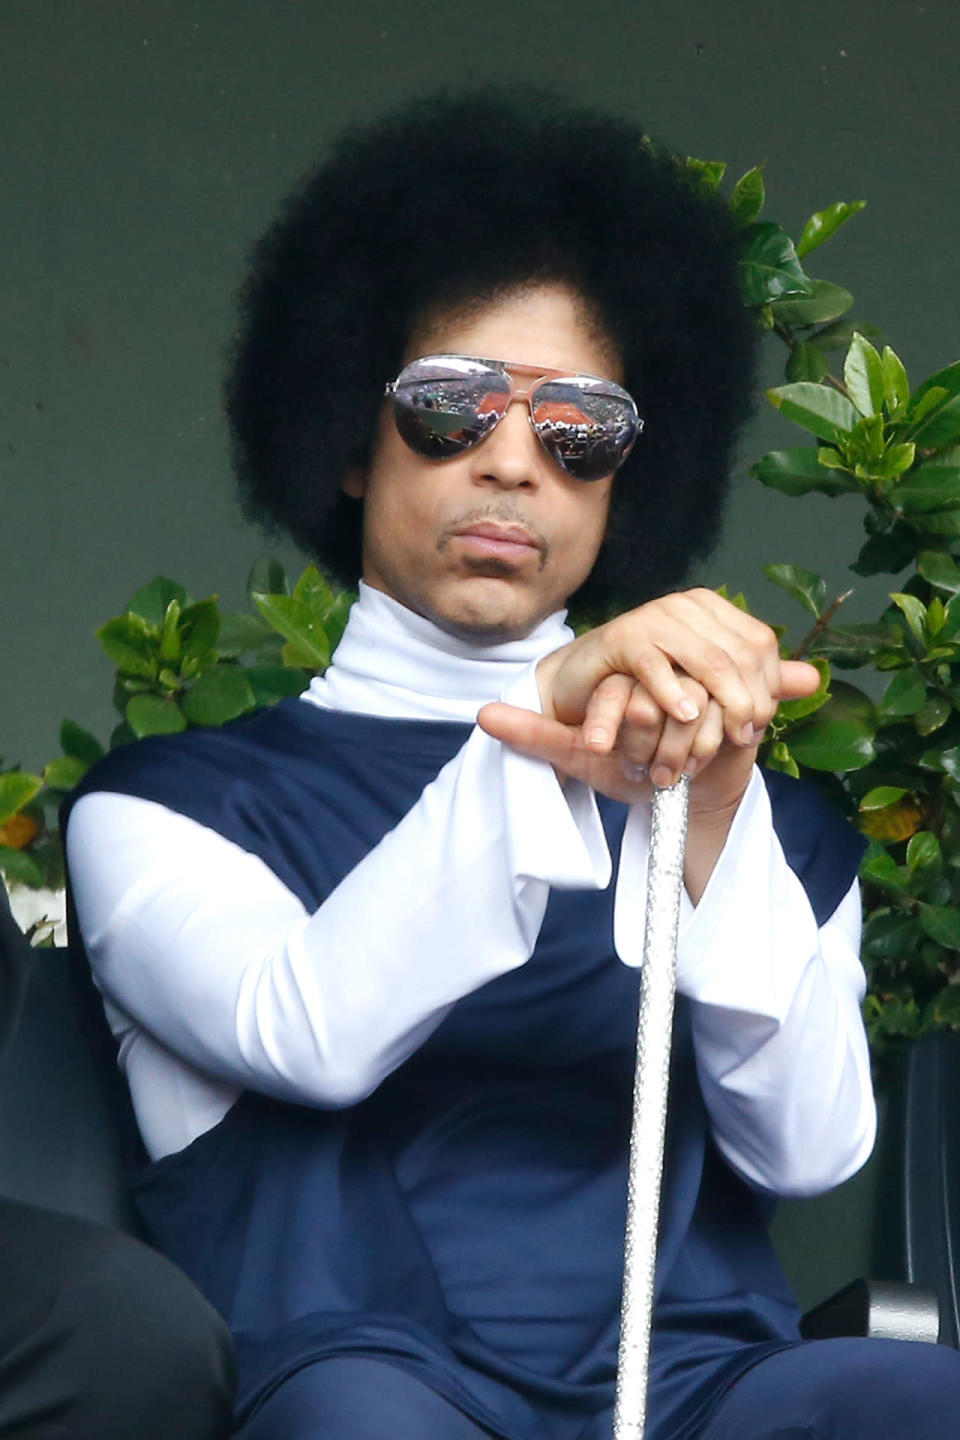 Prince showed some serious style at the 2014 French Open